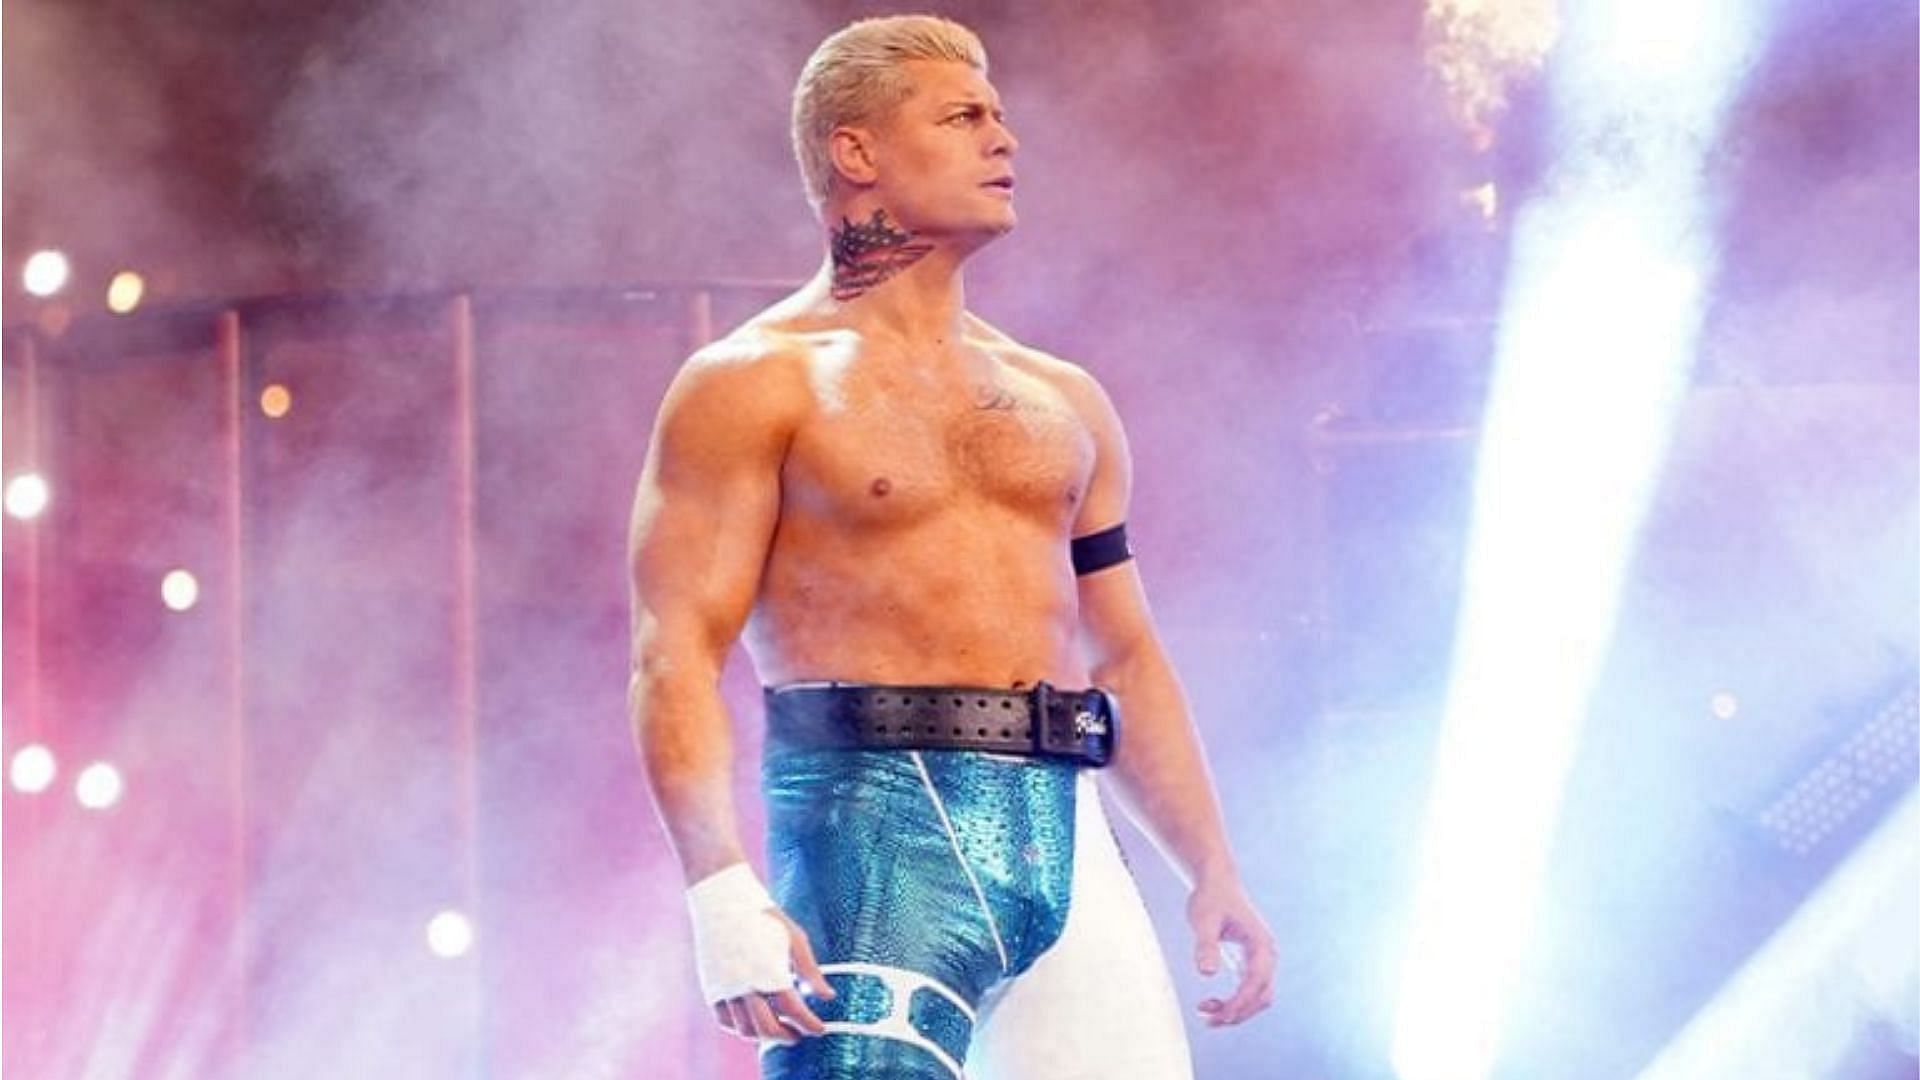 Cody Rhodes was portraying the Stardust character before leaving WWE in 2016